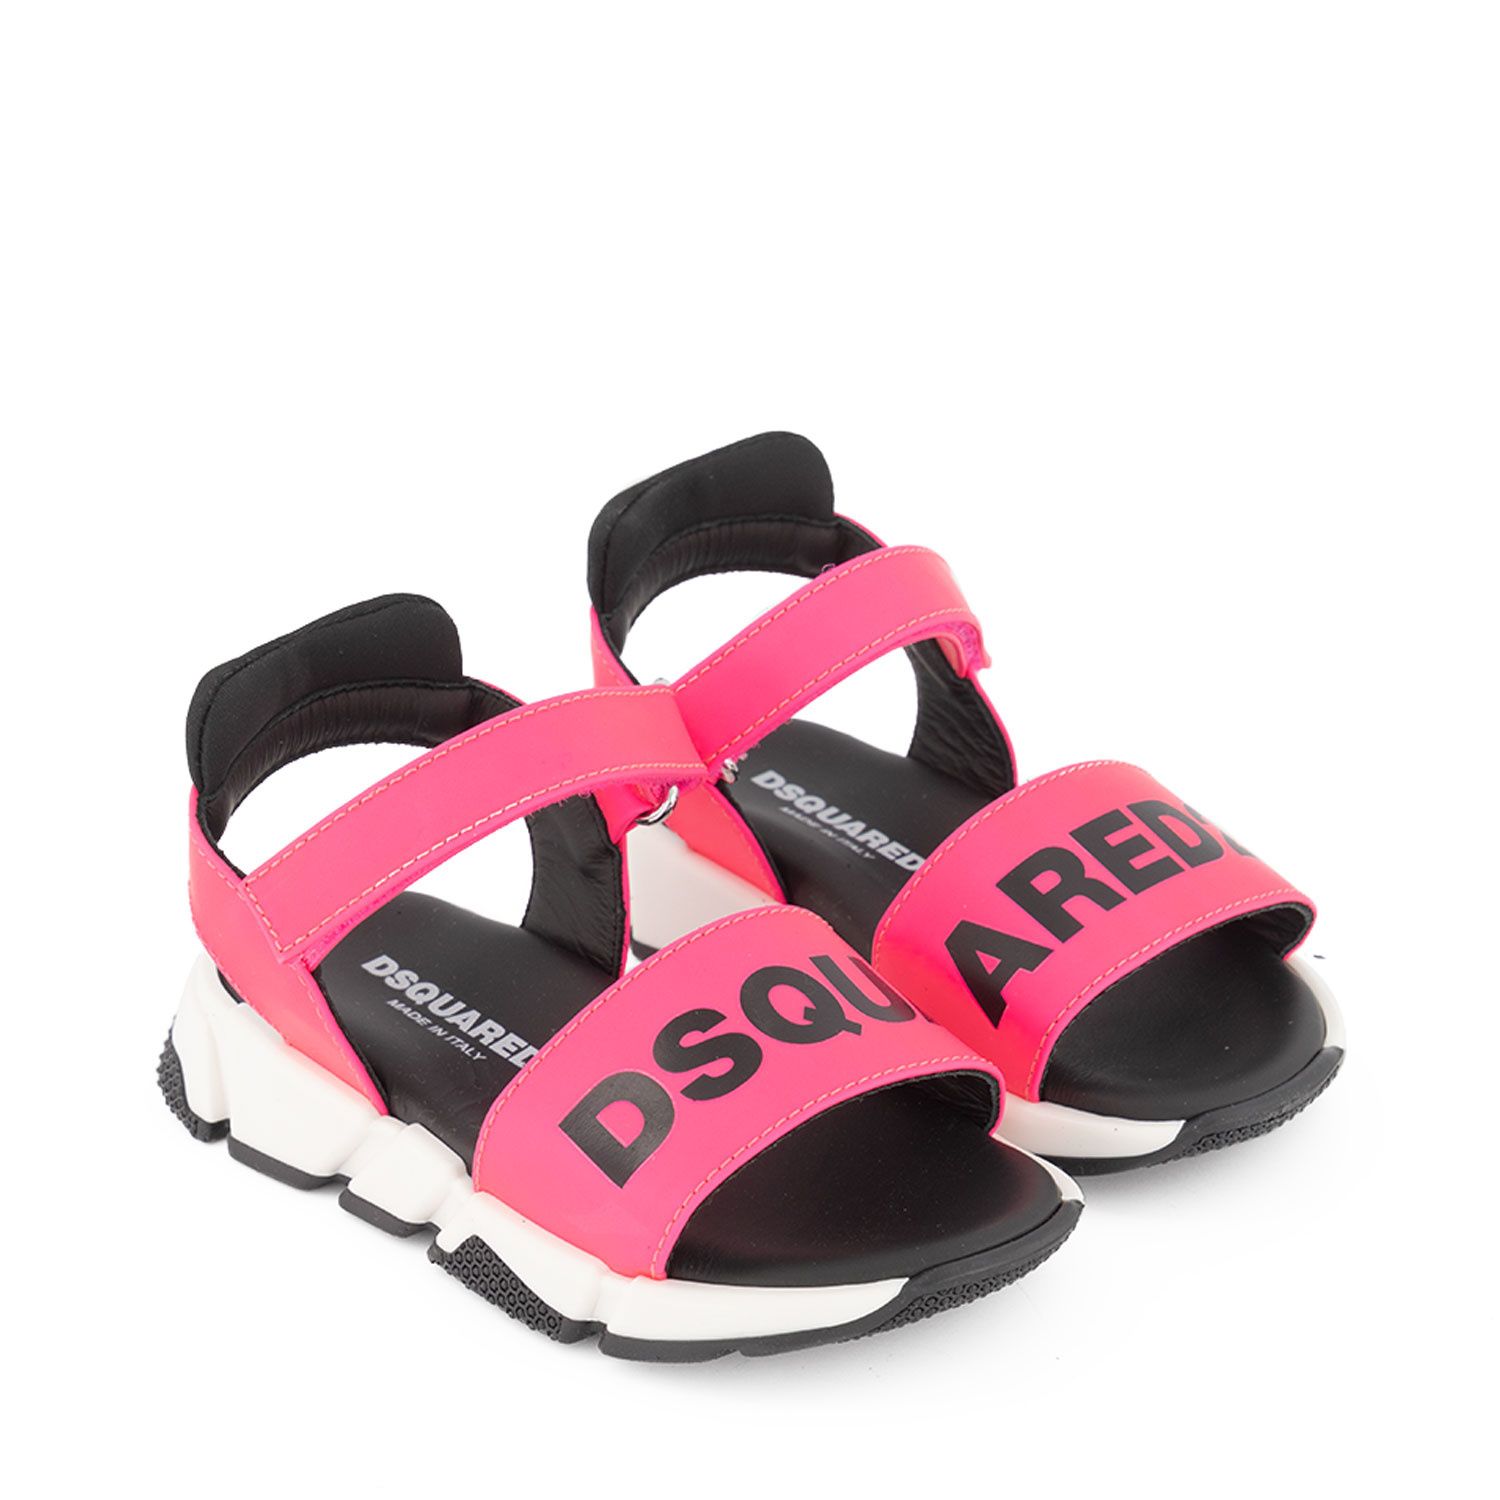 Picture of Dsquared2 70701 kids sandals fluoro pink